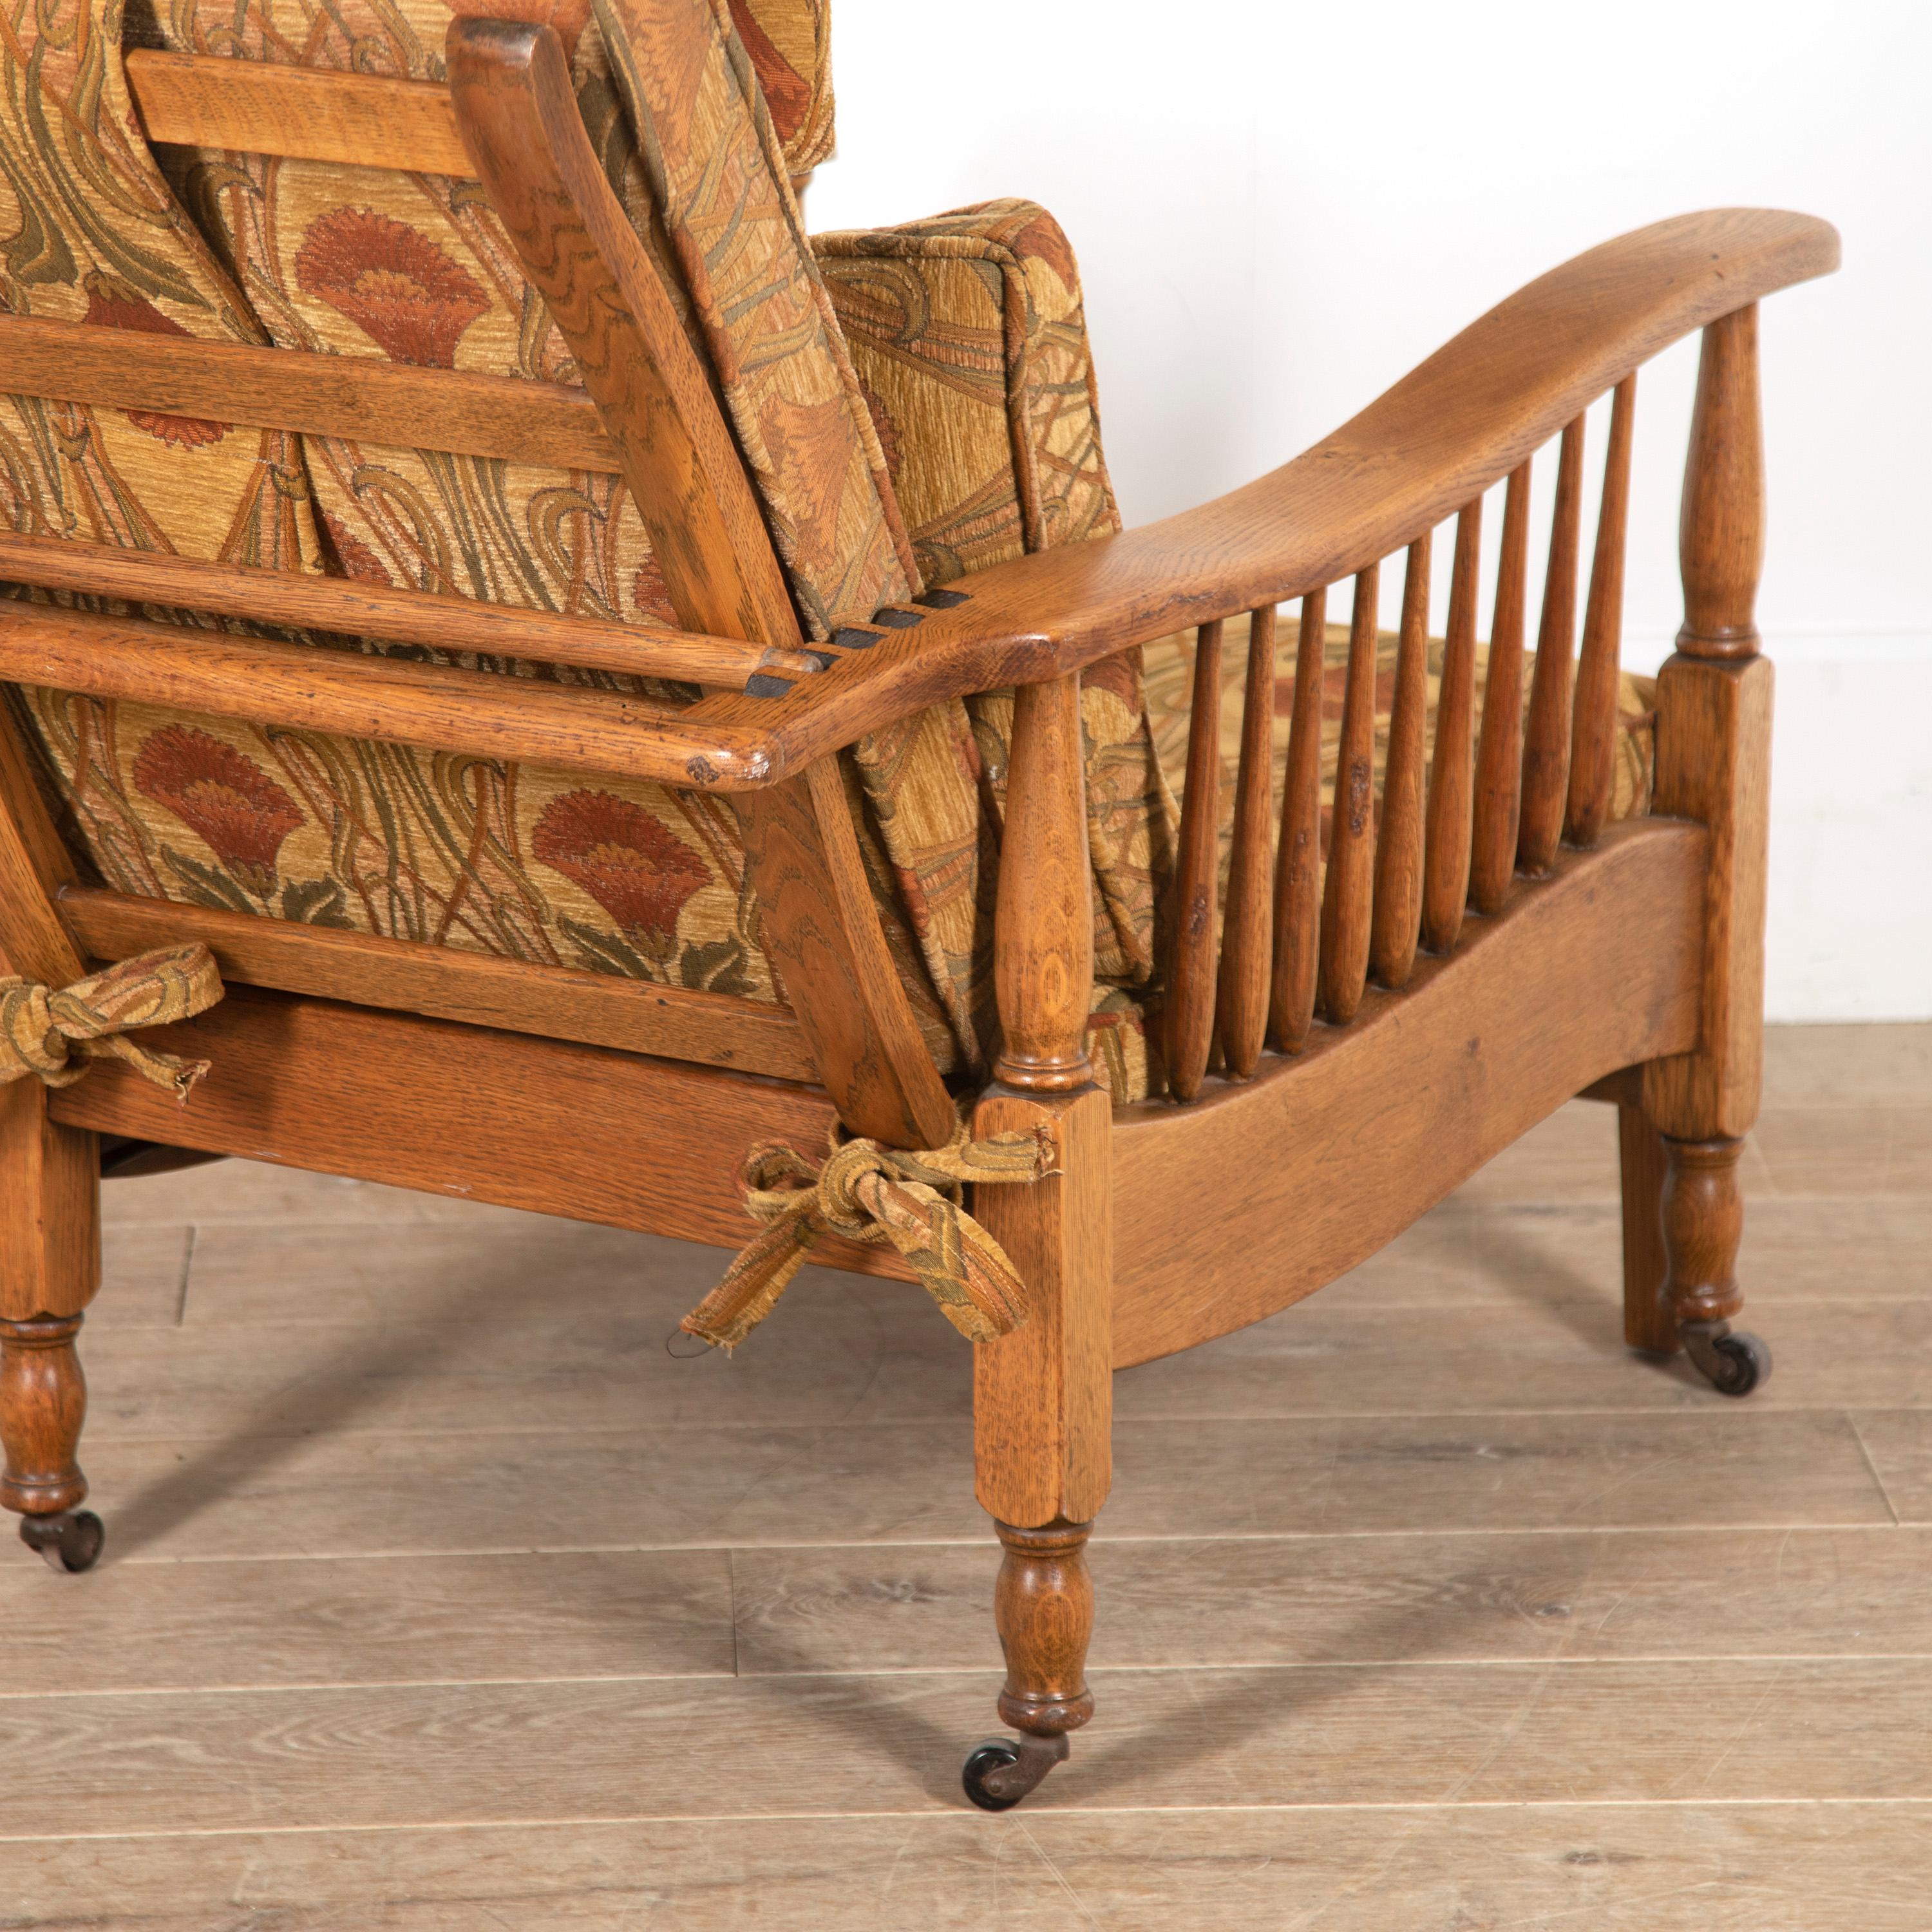 Pair of Arts & Crafts Morris style oak recliner armchairs. 

These armchairs feature decorative extending footrests that are in great working condition for their age. 

Both armchairs have a simple yet elegant form with a great, golden patina